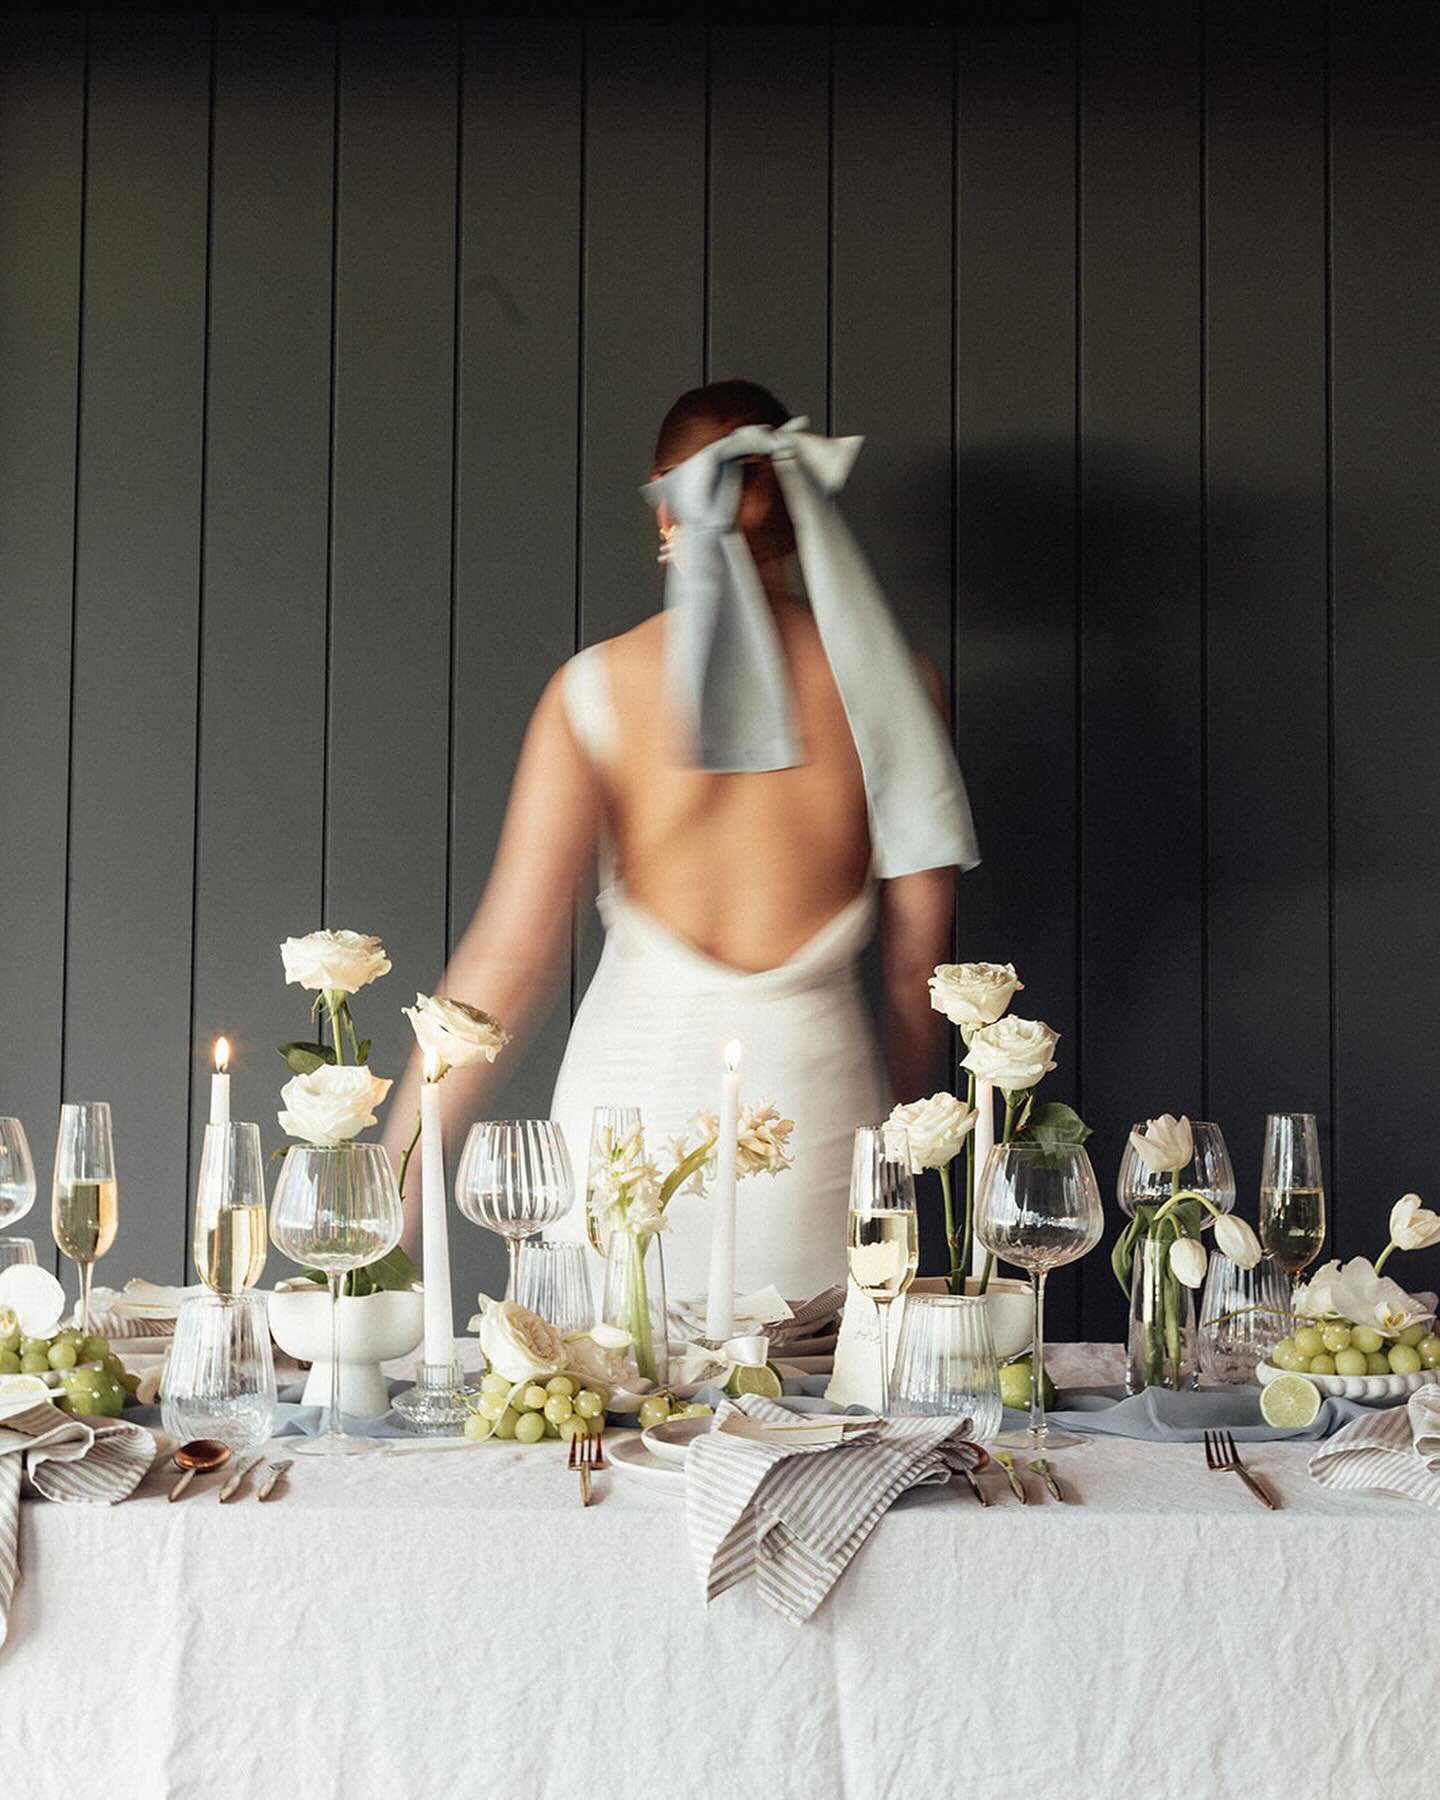 I&rsquo;d stop scrolling if I were you! 

Save this coastal inspired tablescape for later 📌

Photographer: @honeylens.weddings 
Venue: @ridgecliffnz 
Dress and Veil: @sarahstoutebespoke 
Floral: @saturday.collective 
Hair and Makeup: @jessicanicole_